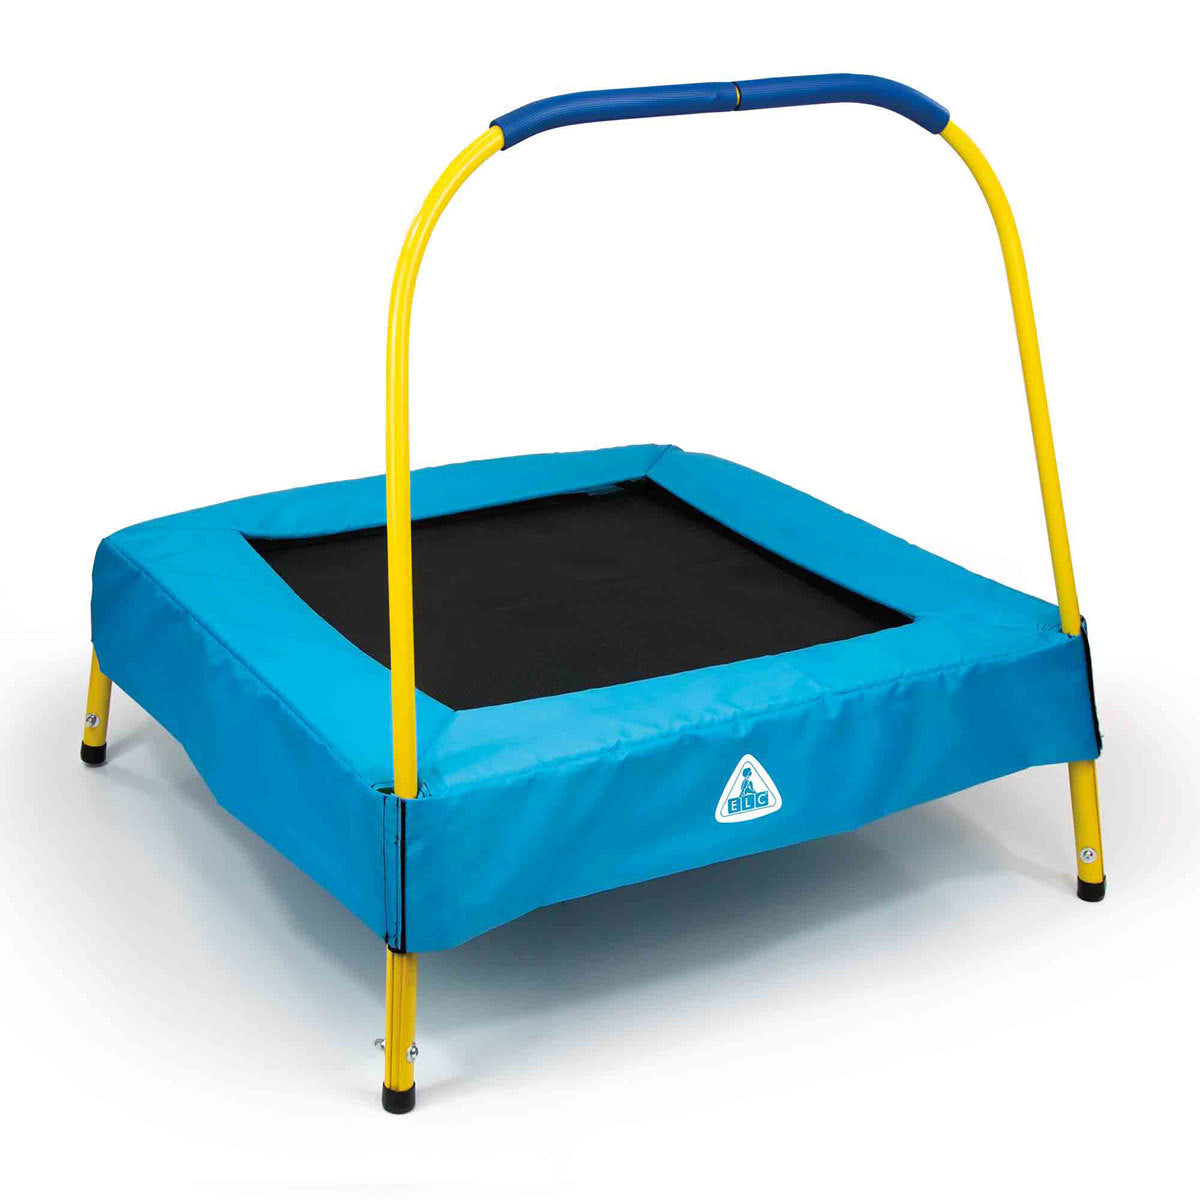 Early Learning Centre Junior 2.6ft Trampoline - Blue